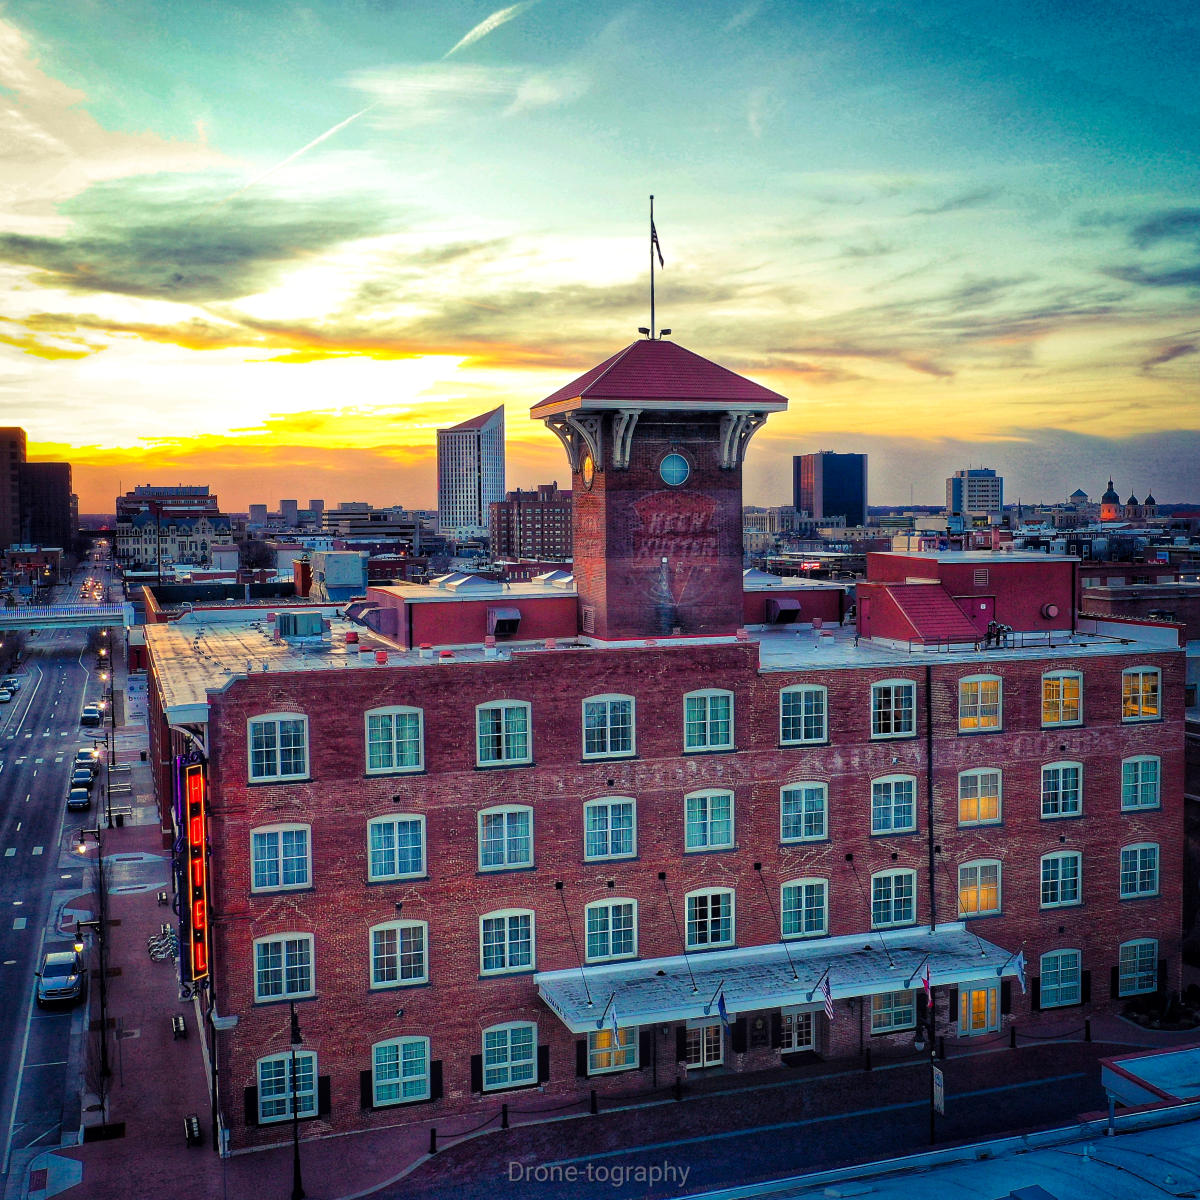 An photo features the Hotel at Old Town with the downtown Wichita skyline in the background at dusk